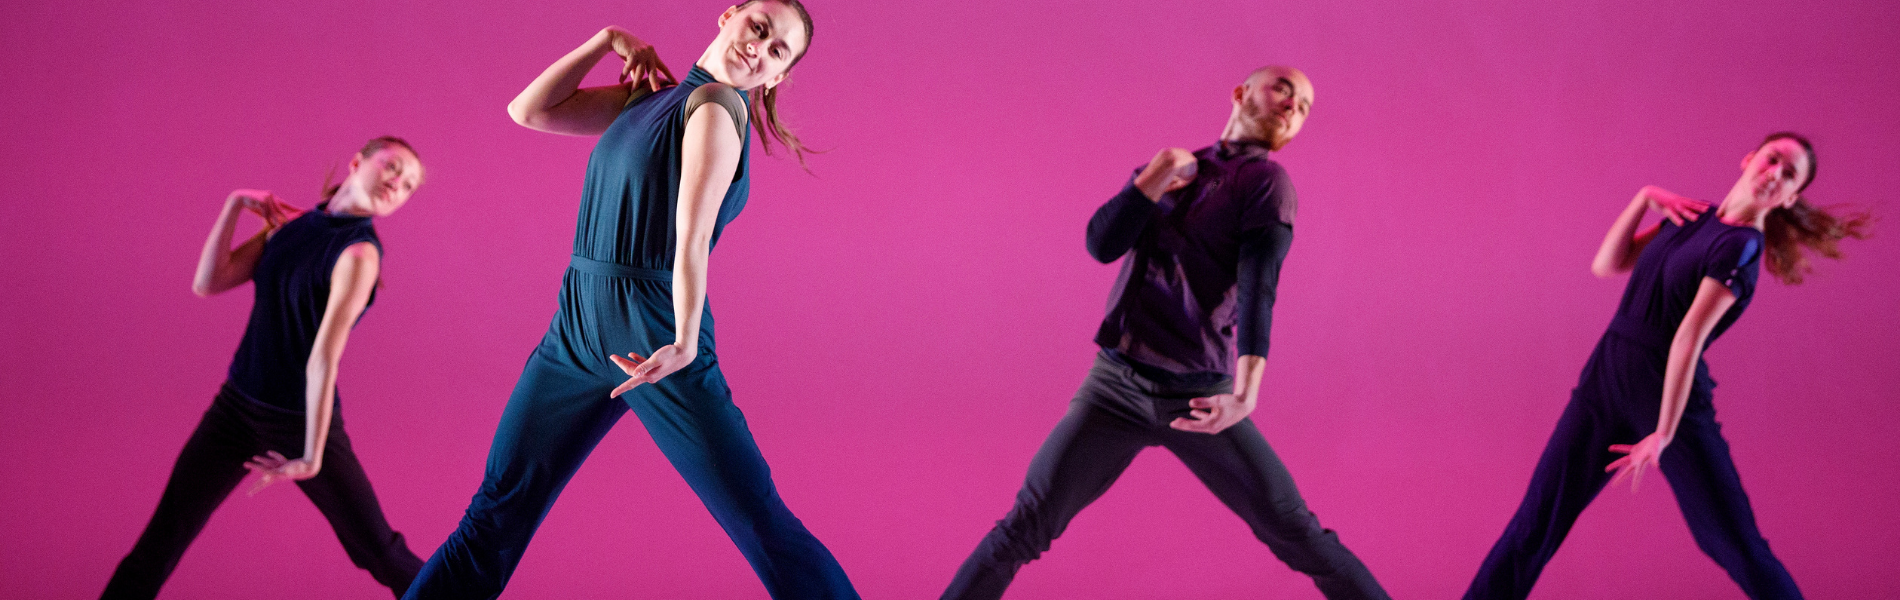 Four dancers in front of a pink background